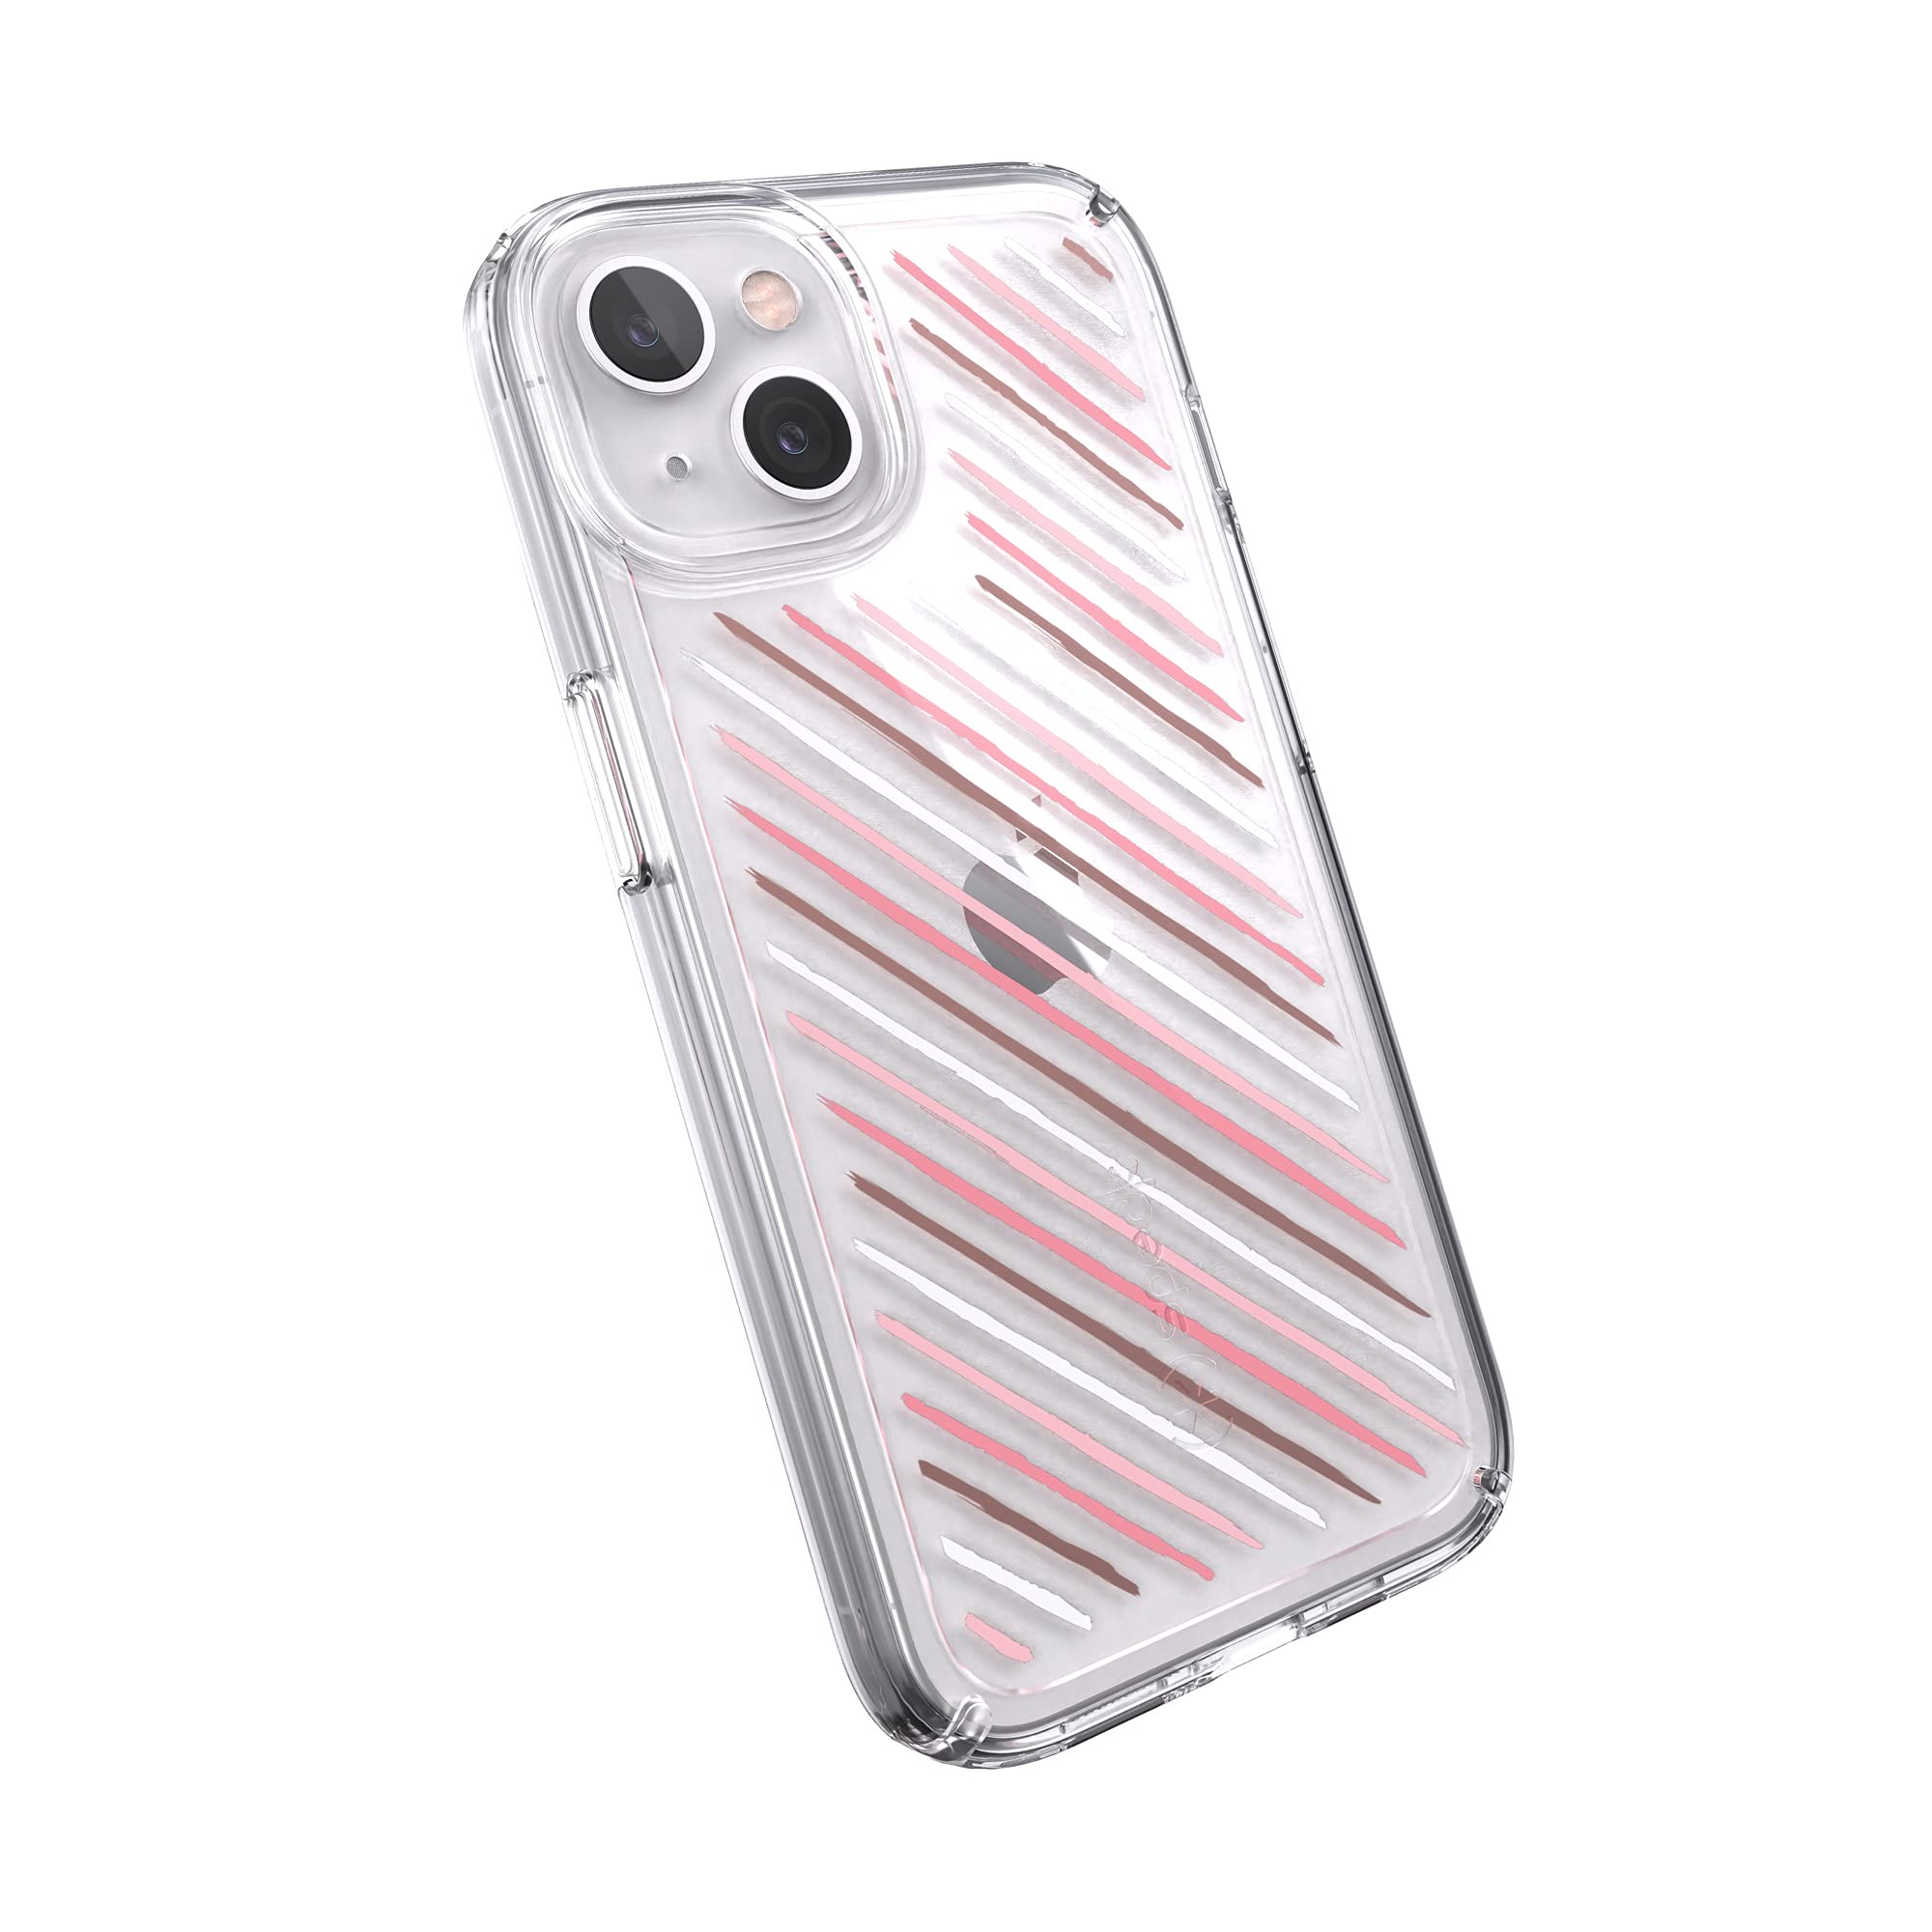 Speck iPhone 13 Stripes Case - Drop Protection with Anti-Yellowing & Anti-Fade with Slim, Dual Layer Design for 6.1 Inch Phones - iPhone 13 Case - Clear, Infused Stripes GemShell